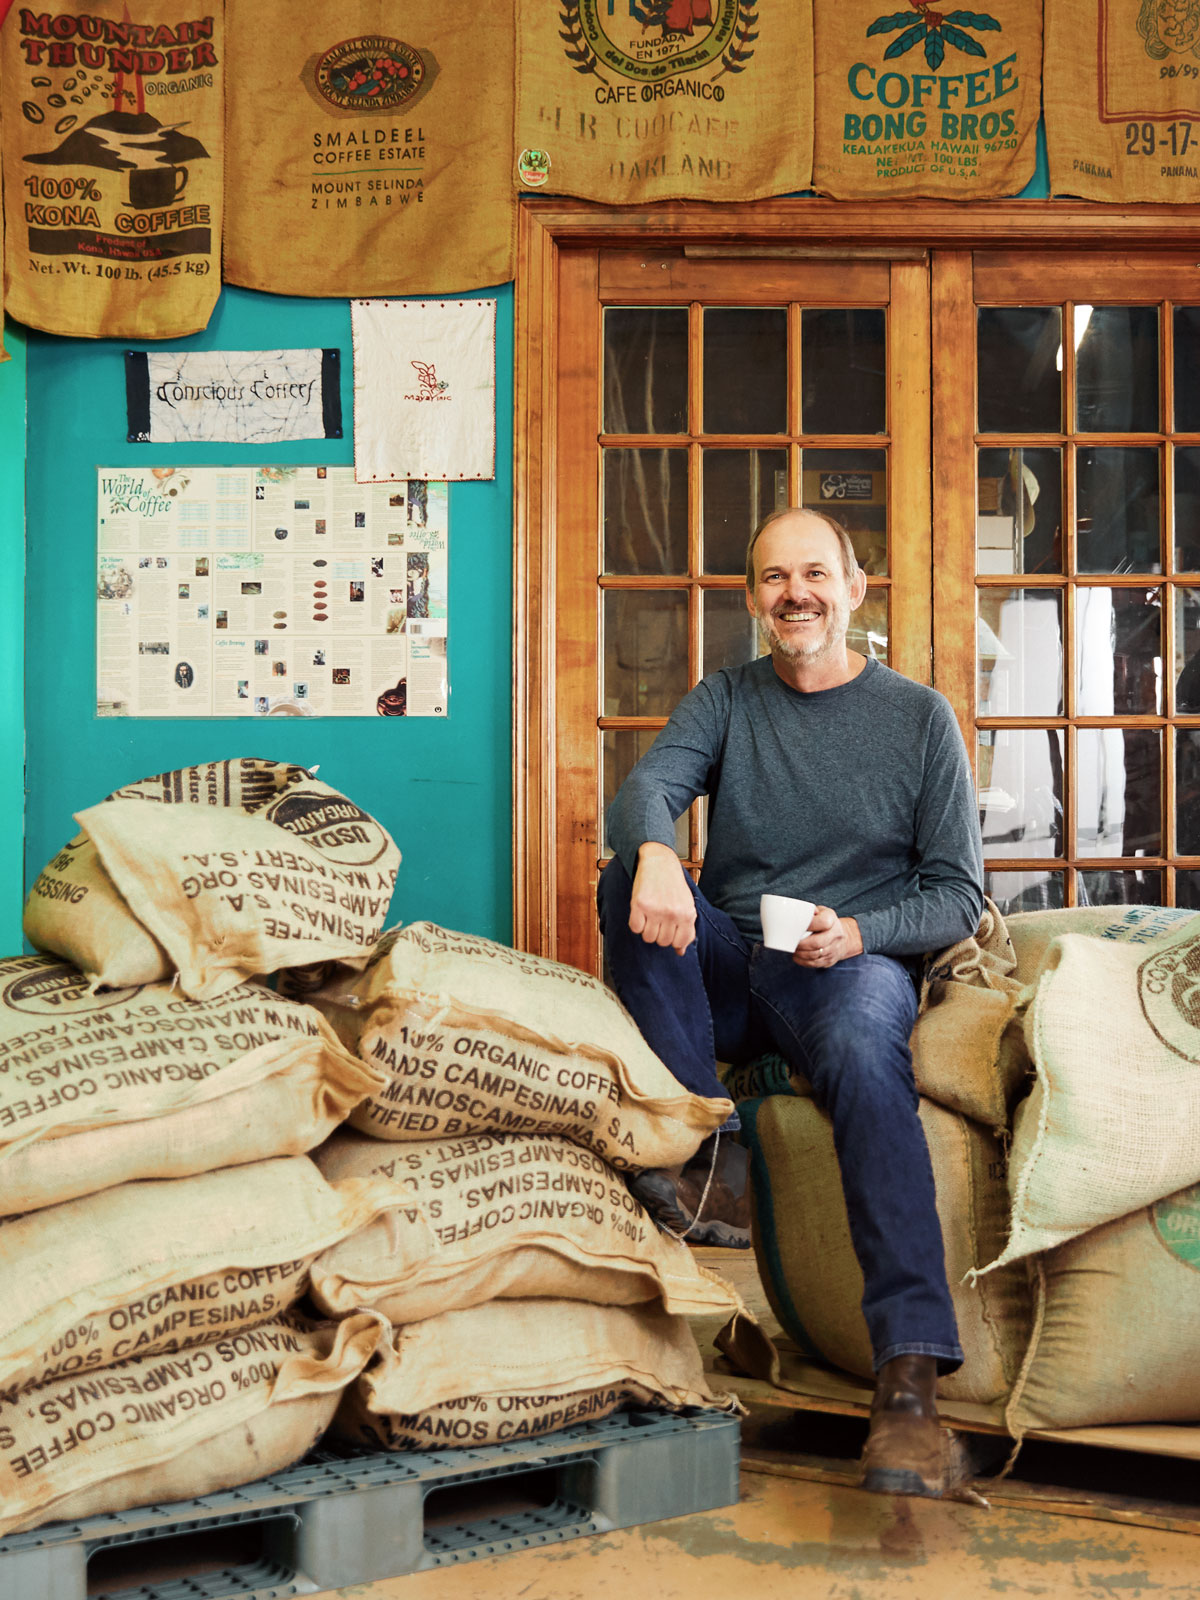 The owner of Conscious Coffees sitting on a stack of burlap bags of coffee beans